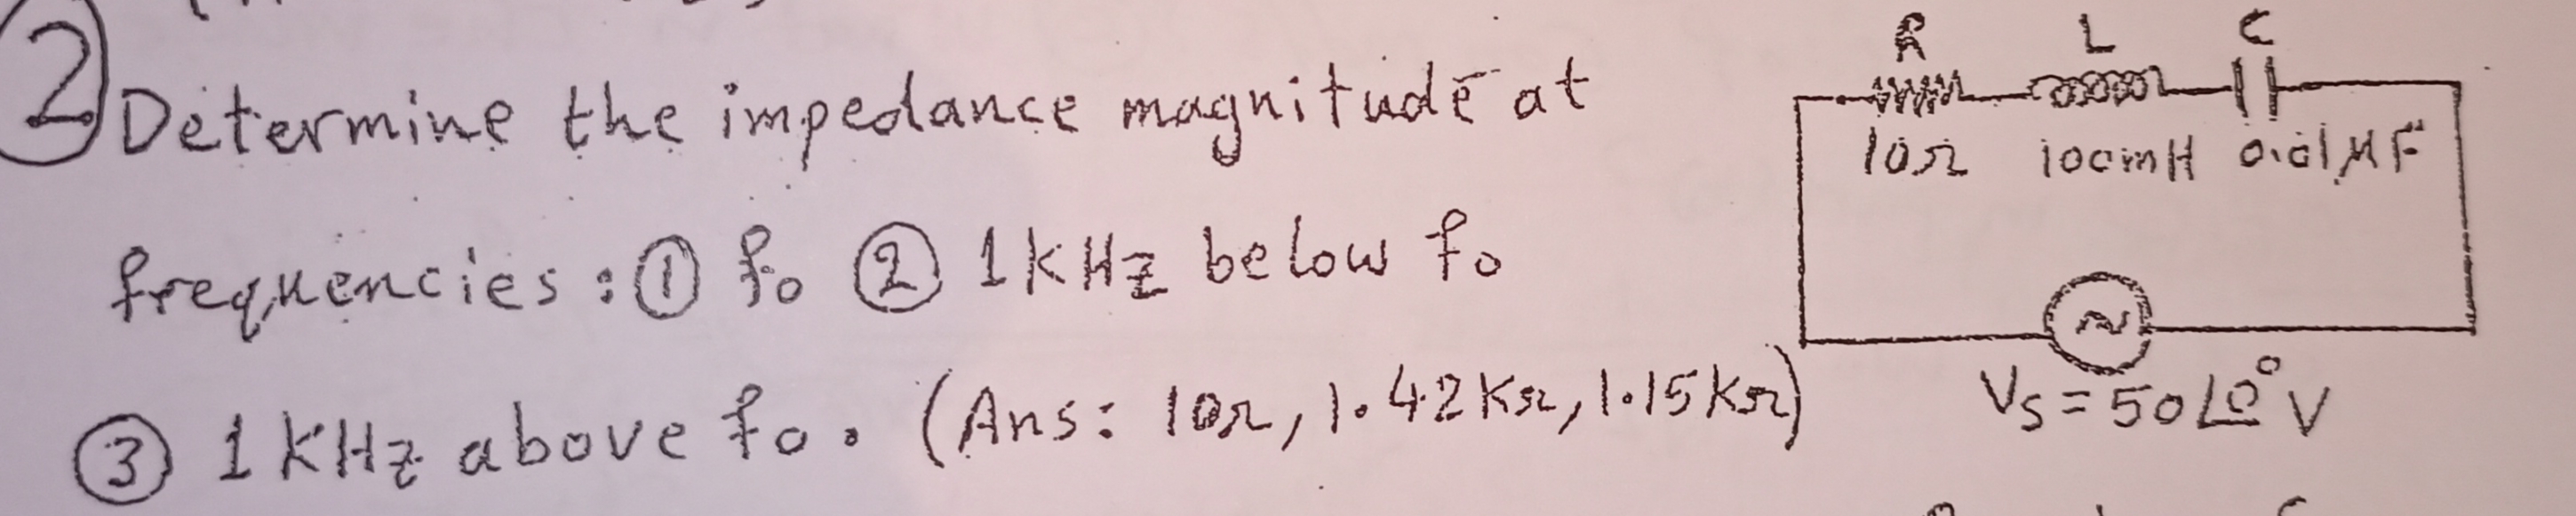 Determine the impedance magnitudé at
frequencies:0 %. 1KH2 be low fo
3ikHz above fo. (Ans: 1or, l.42 Kse, 1.15 kr)
Vs =50L0 V
